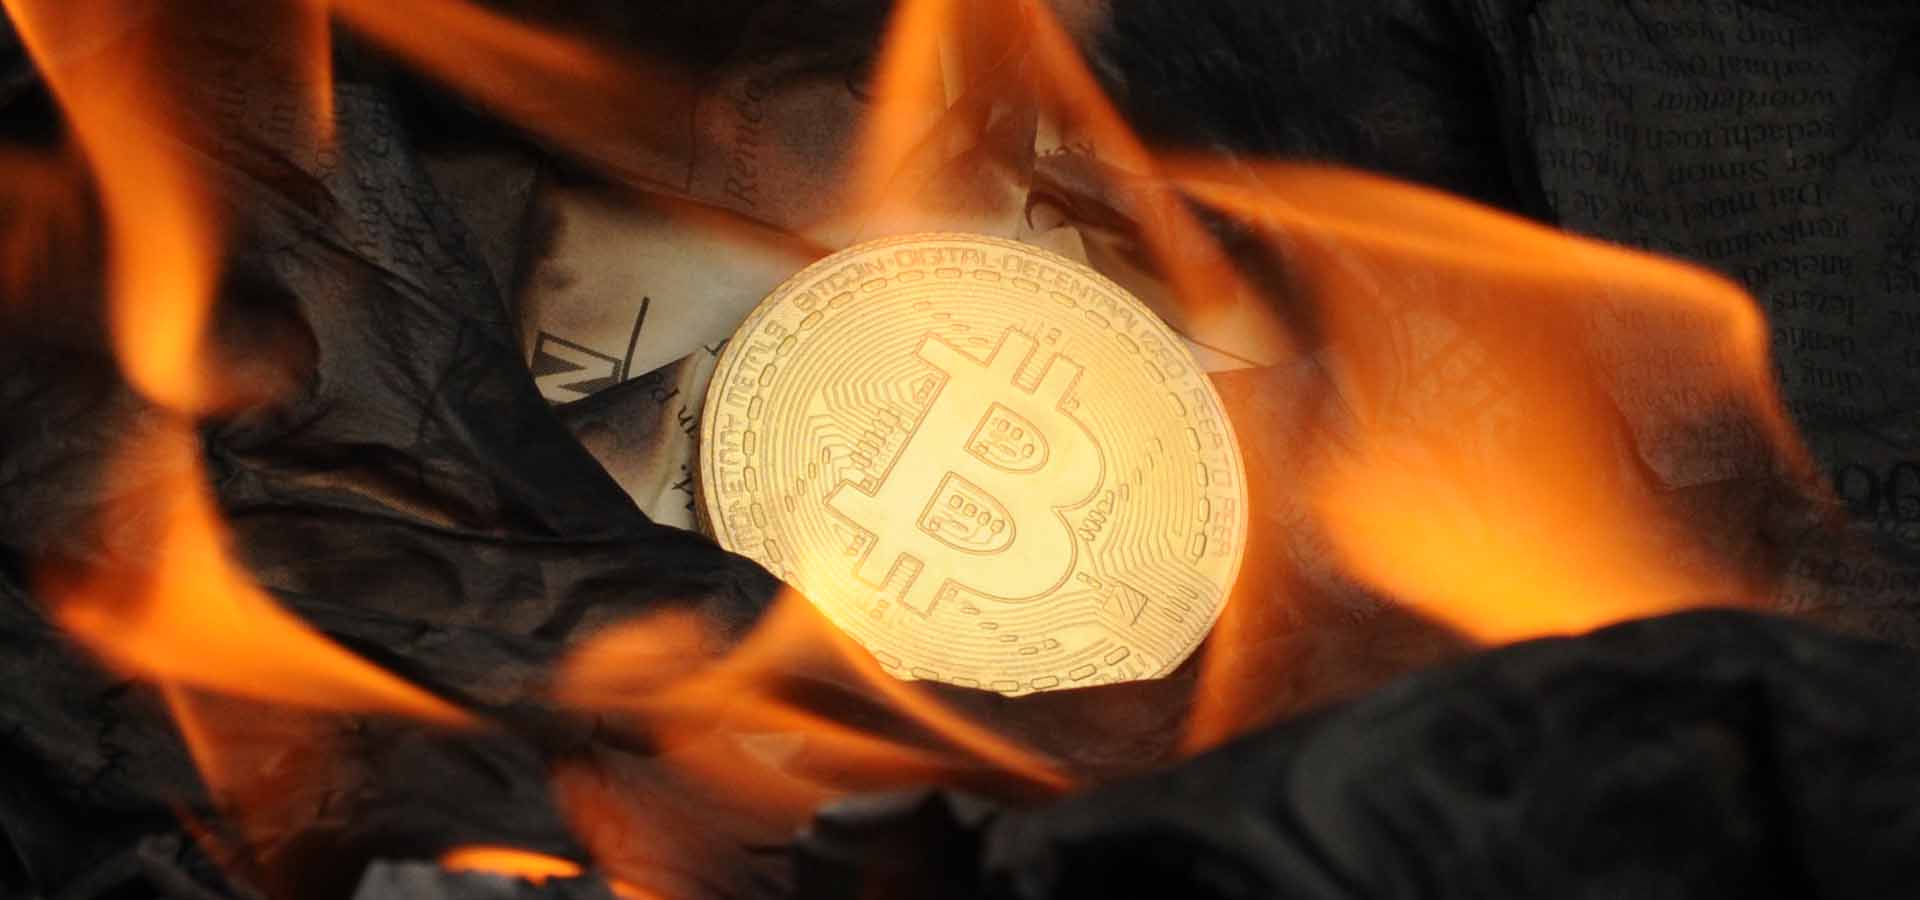 Bitcoin To 'Disappear In A Puff Of Smoke?' - Or Are The Fires Just Getting Stoked?